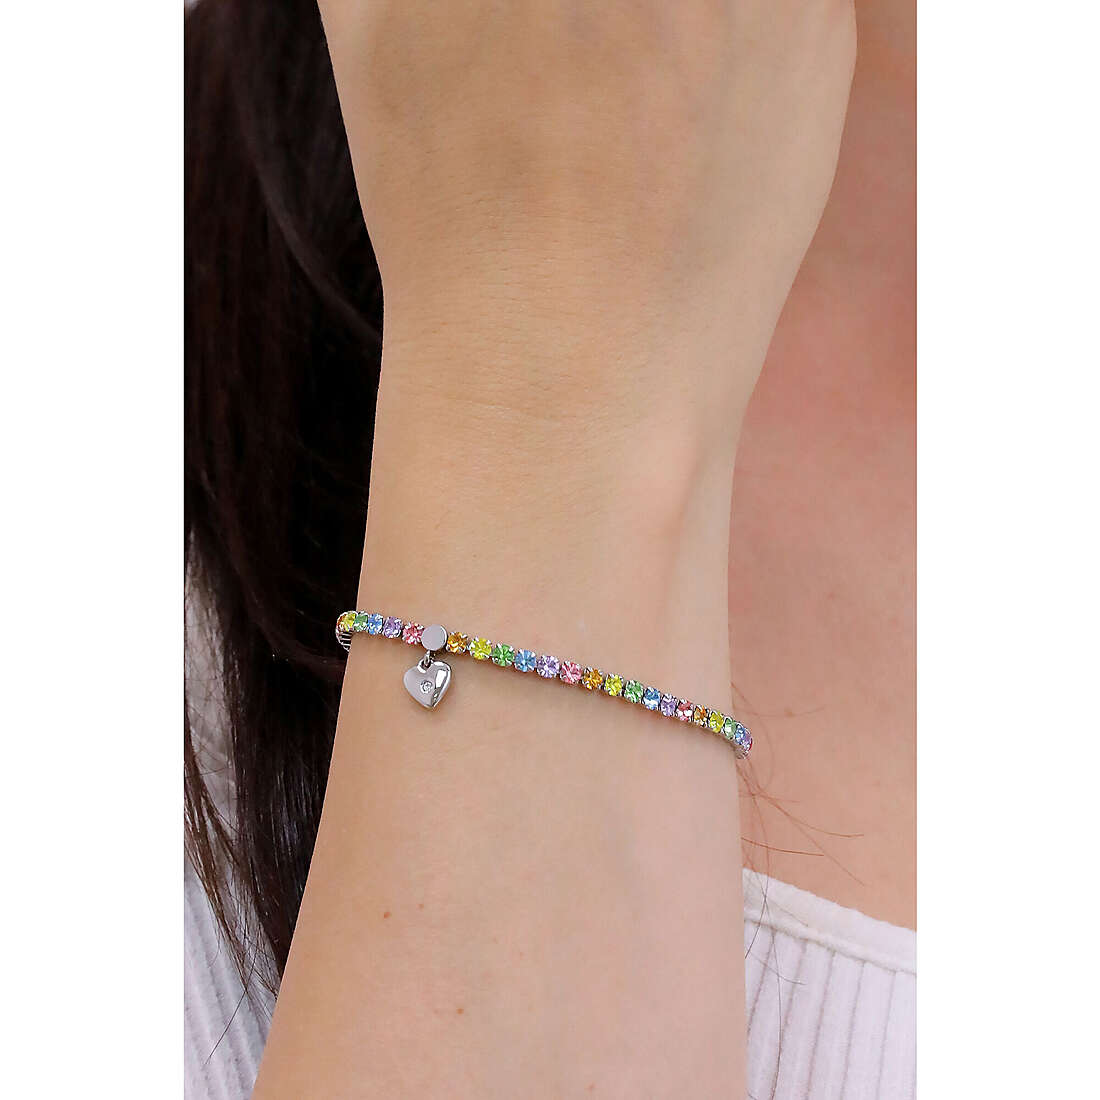 2Jewels Armbanden Youcolors frau 232392 Ich trage